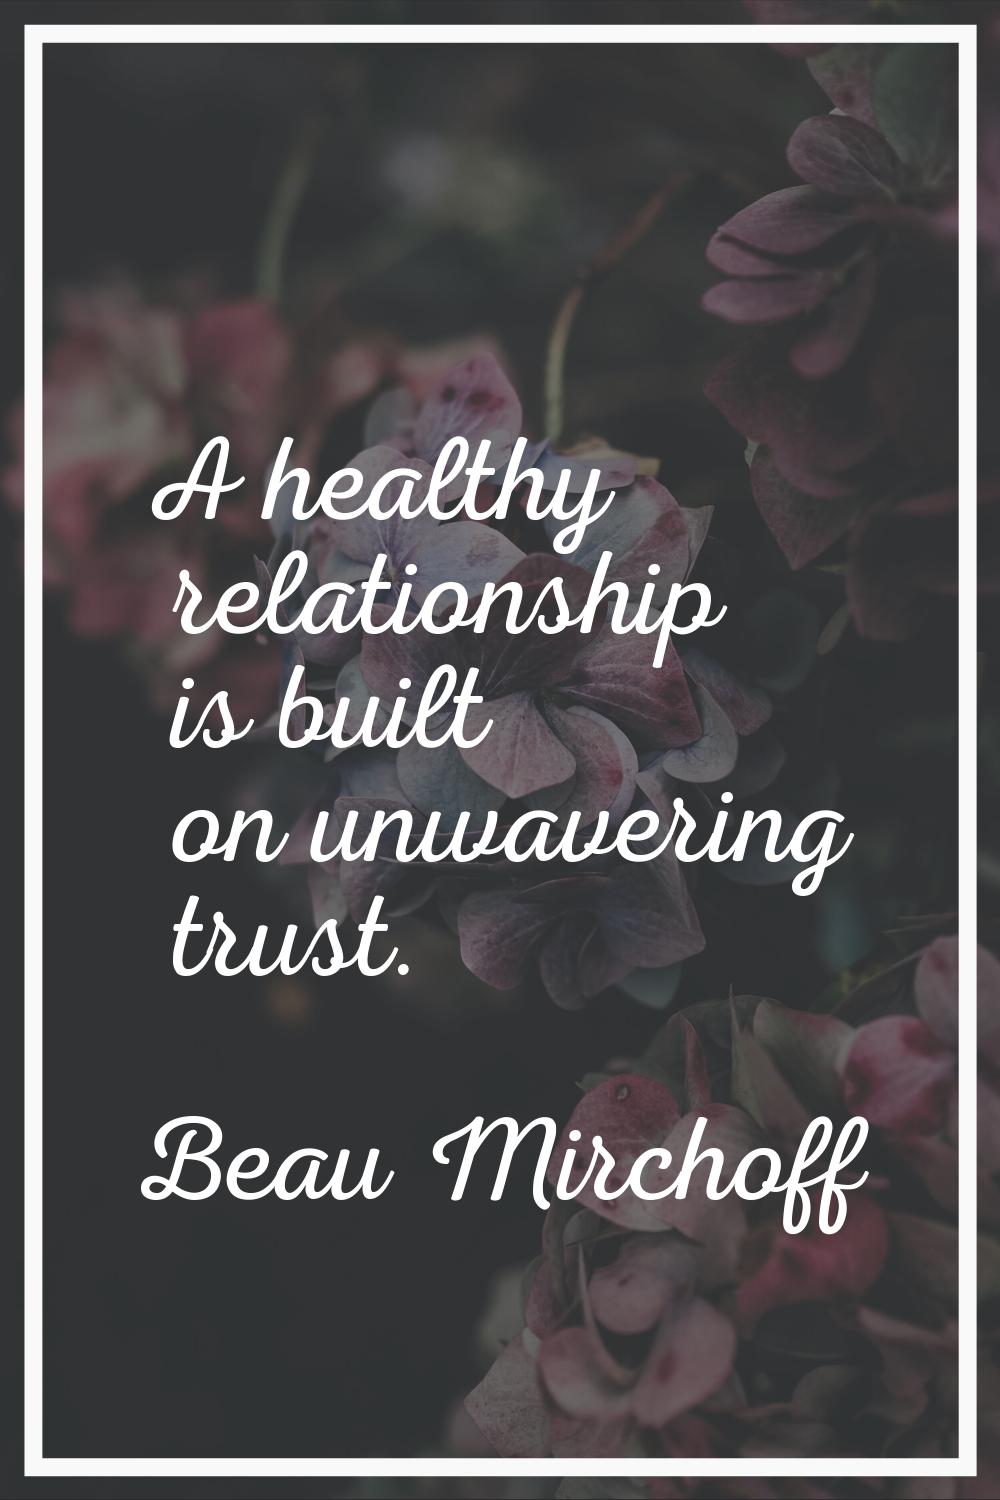 A healthy relationship is built on unwavering trust.